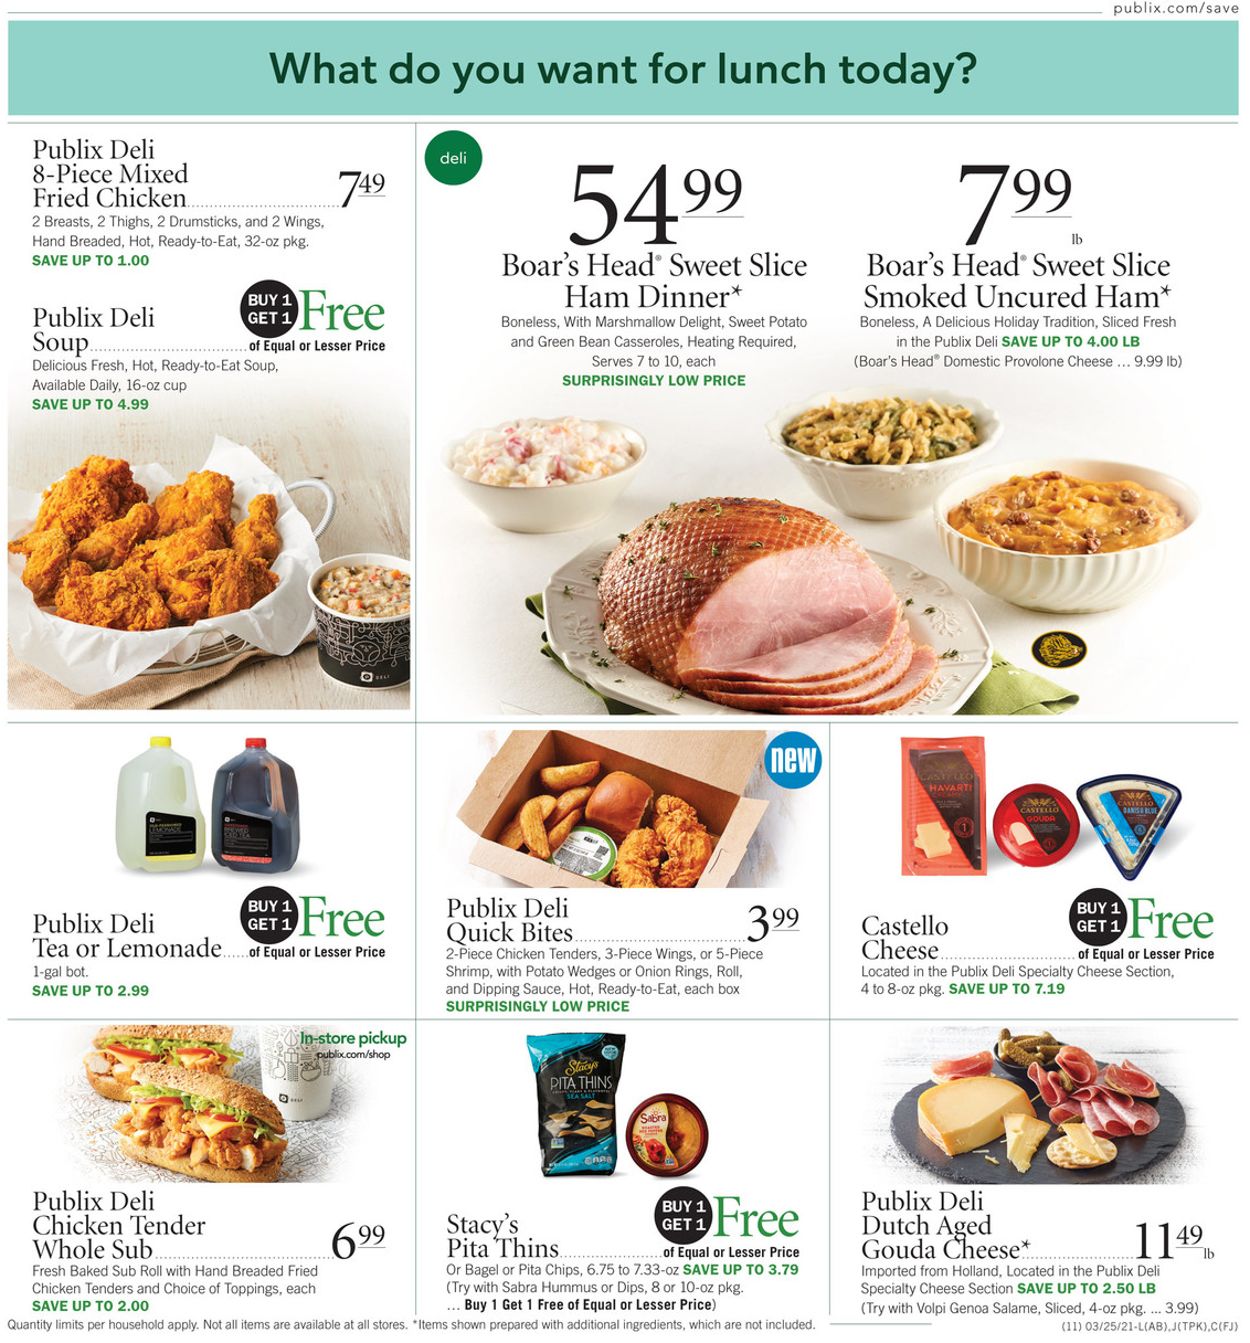 Best Ever Publix Easter Dinners Easy Recipes To Make at Home